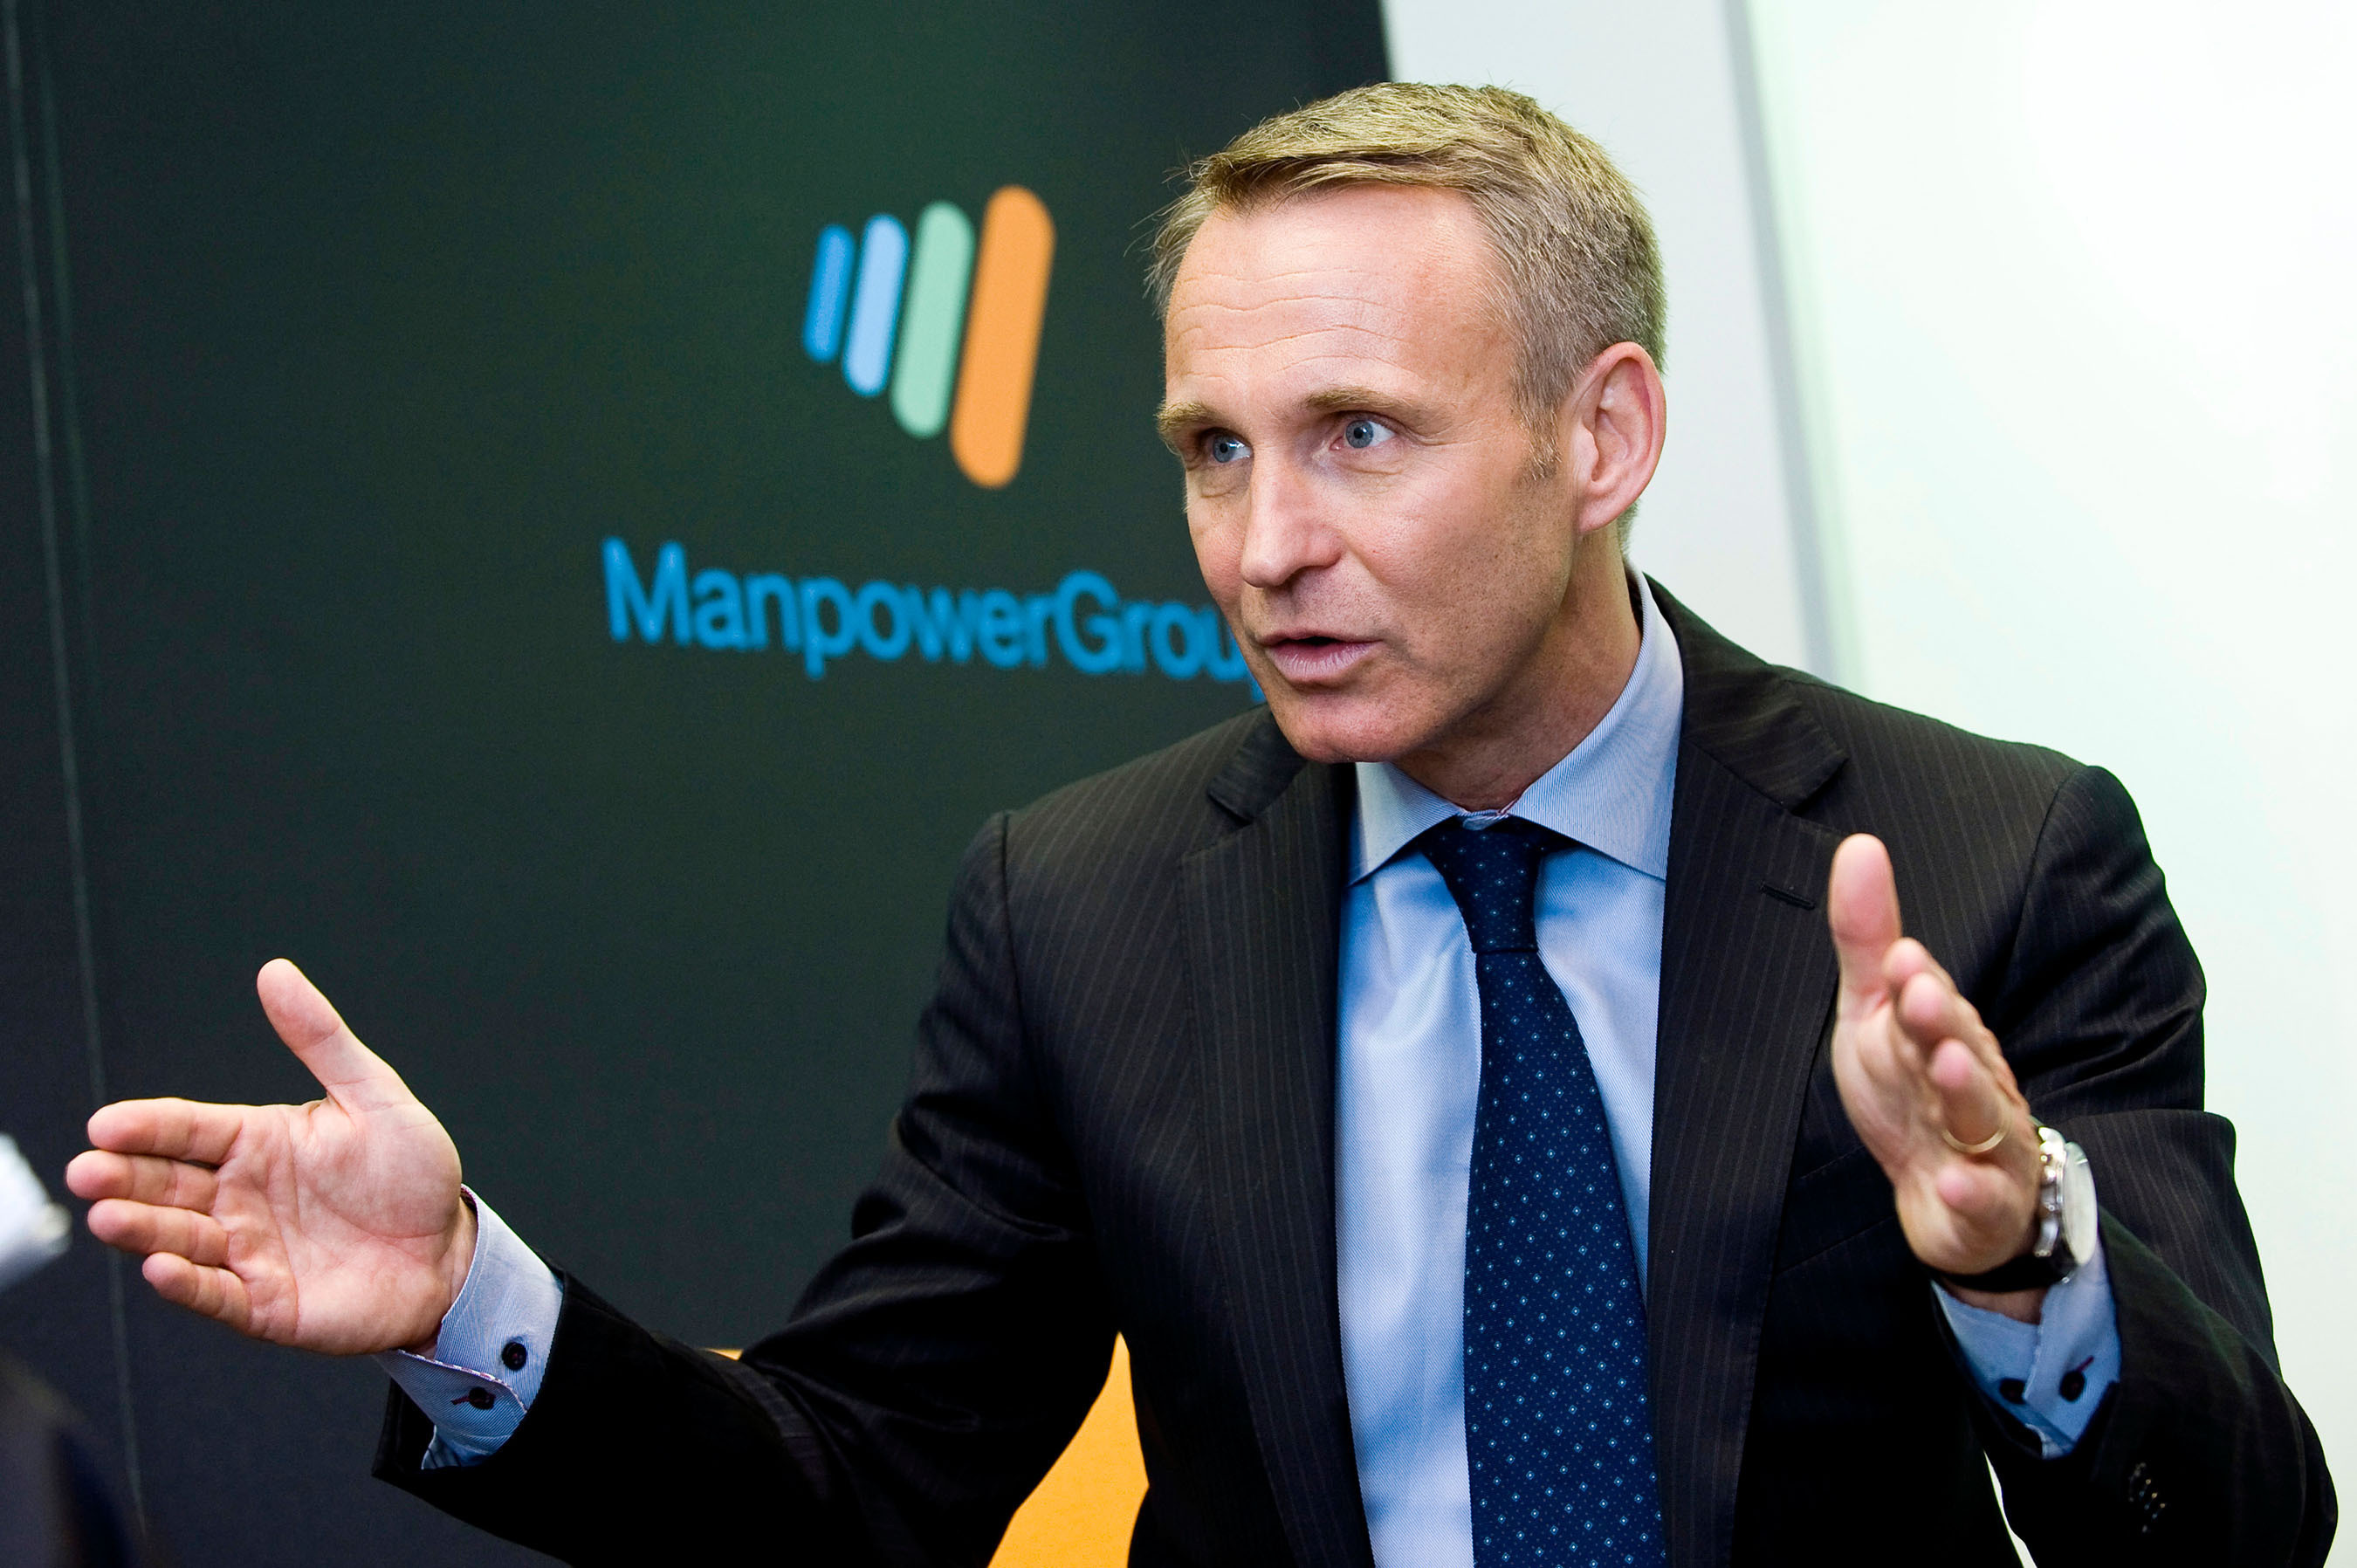 Jonas Prising, ManpowerGroup President, will join the world's business and political leaders at the World Economic Forum Annual Meeting in Davos, Switzerland, next week. (PRNewsFoto/ManpowerGroup) (PRNewsFoto/MANPOWERGROUP)